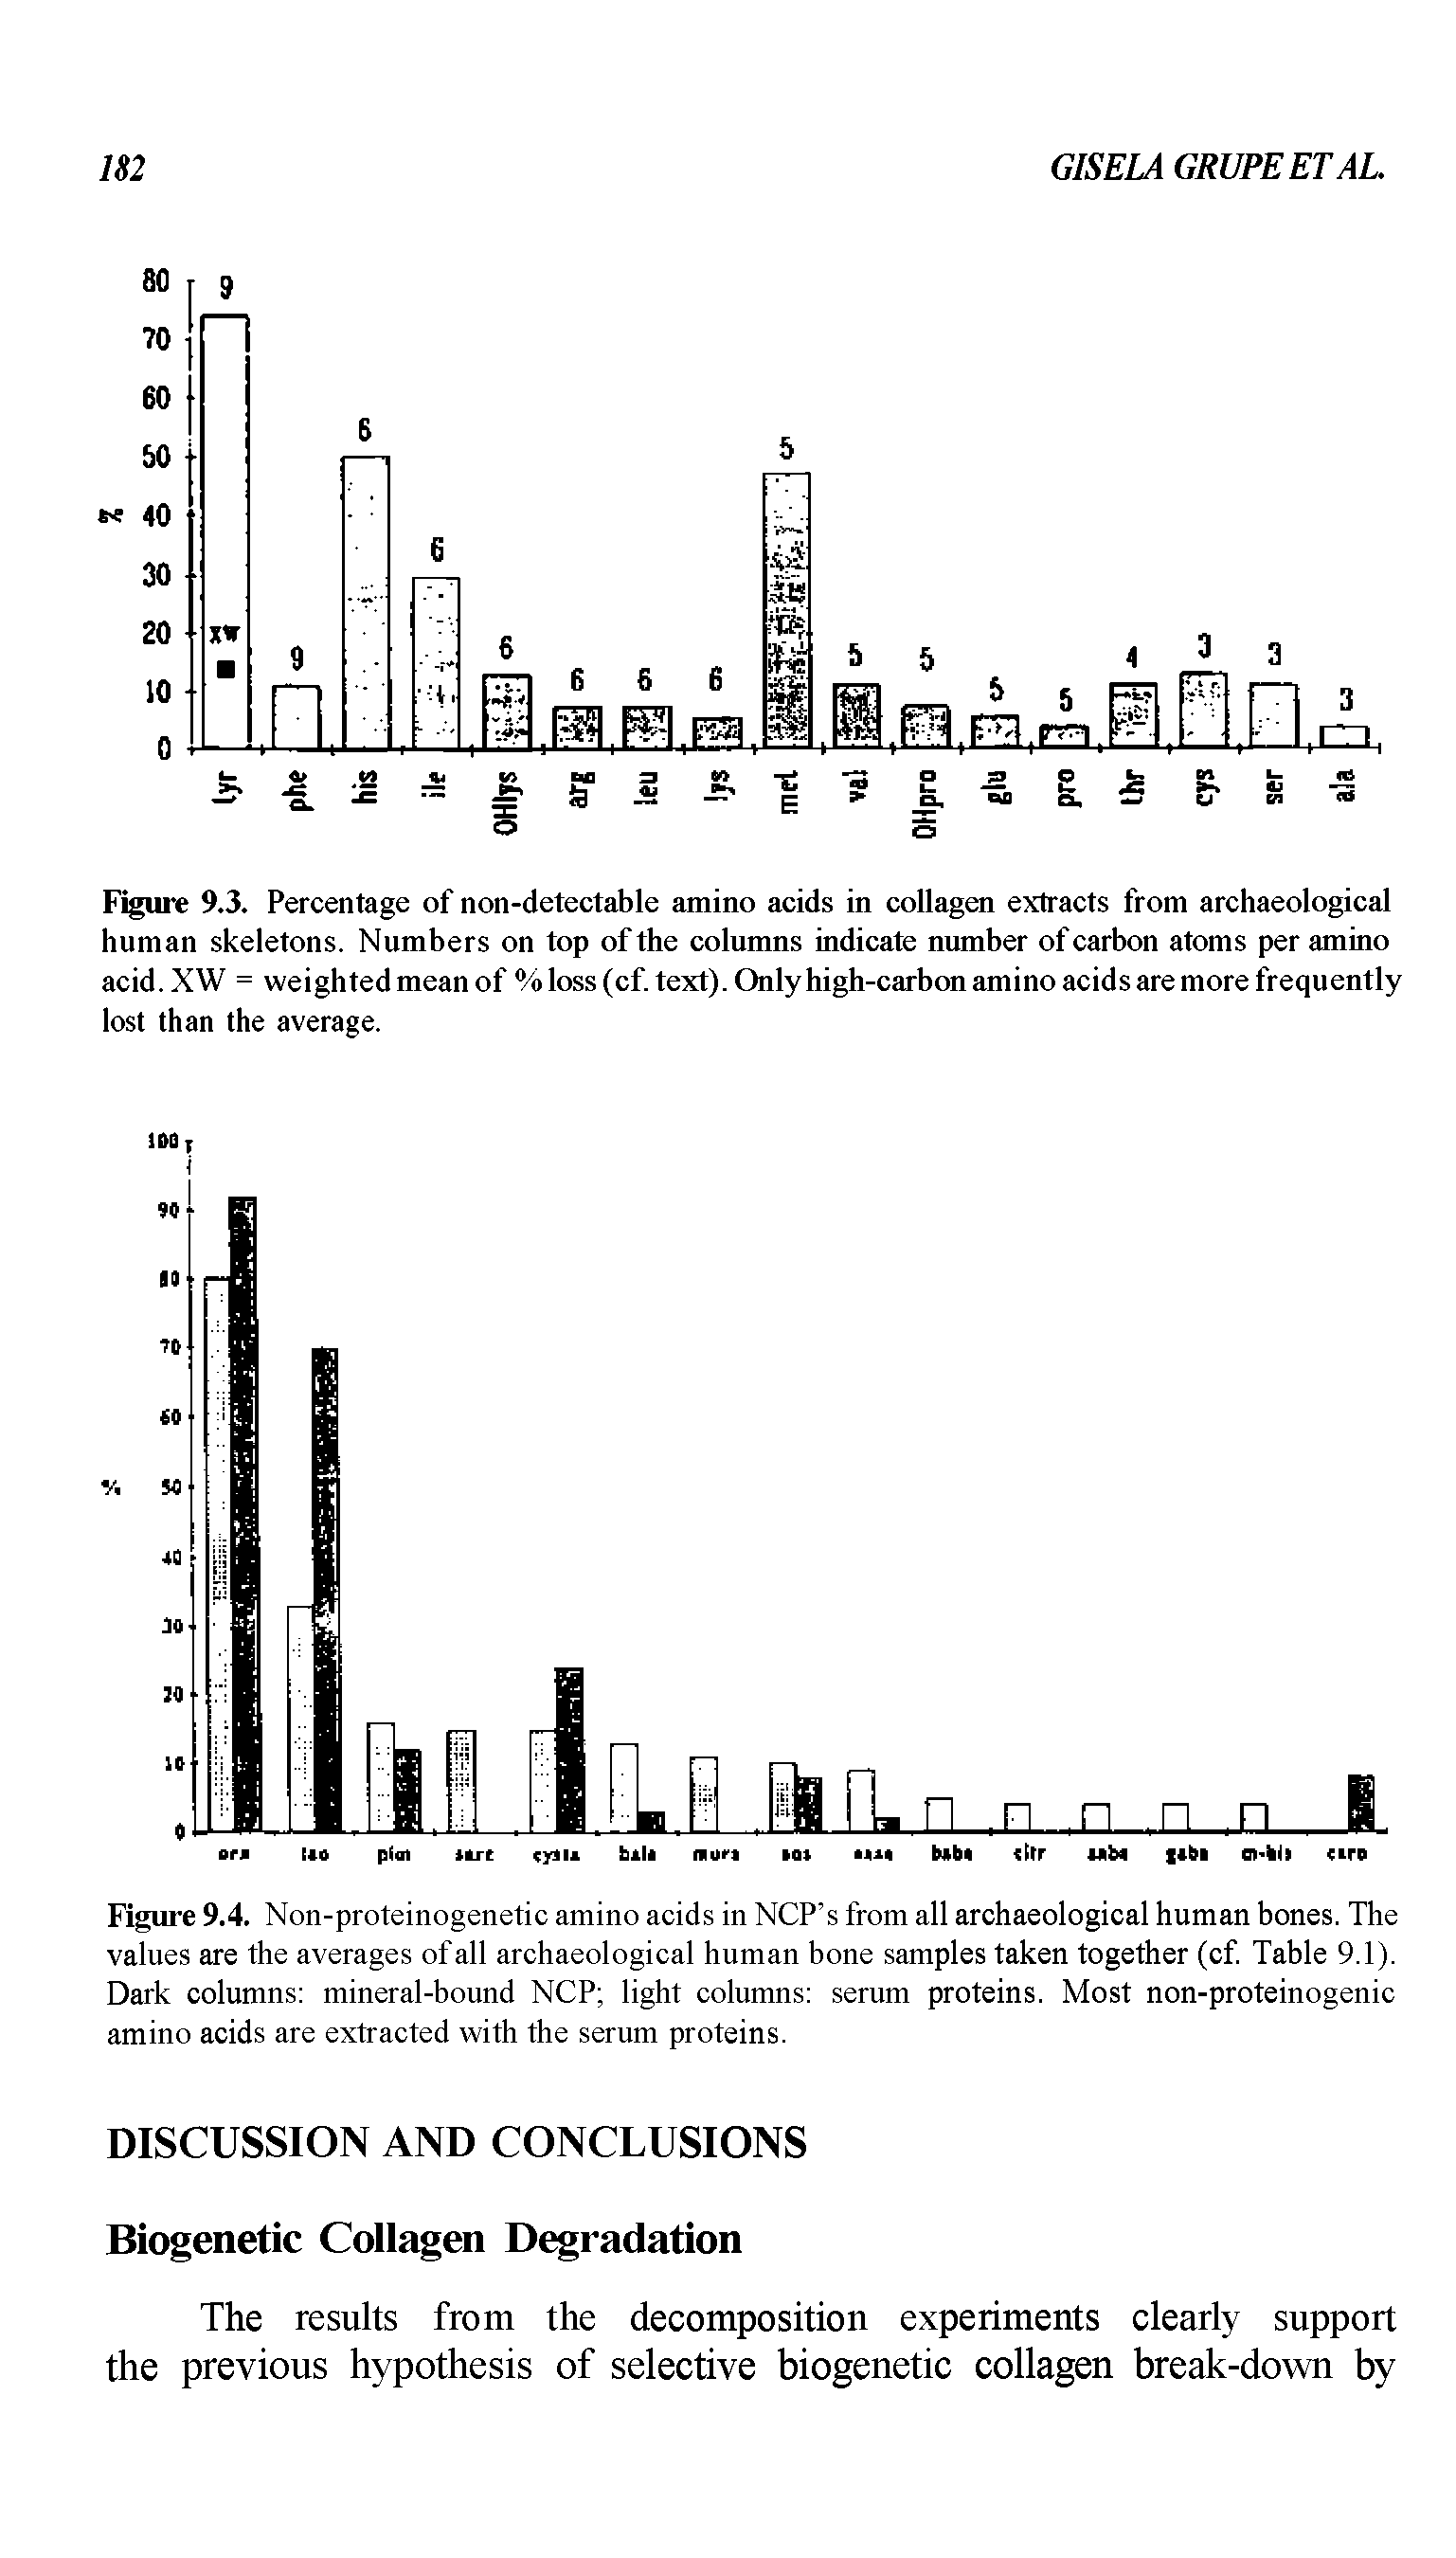 Figure 9.4. Non-proteinogenetic amino acids in NCP s from all archaeological human bones. The values are the averages of all archaeological human bone samples taken together (cf Table 9.1). Dark columns mineral-bound NCP light columns serum proteins. Most non-proteinogenic amino acids are extracted with the serum proteins.